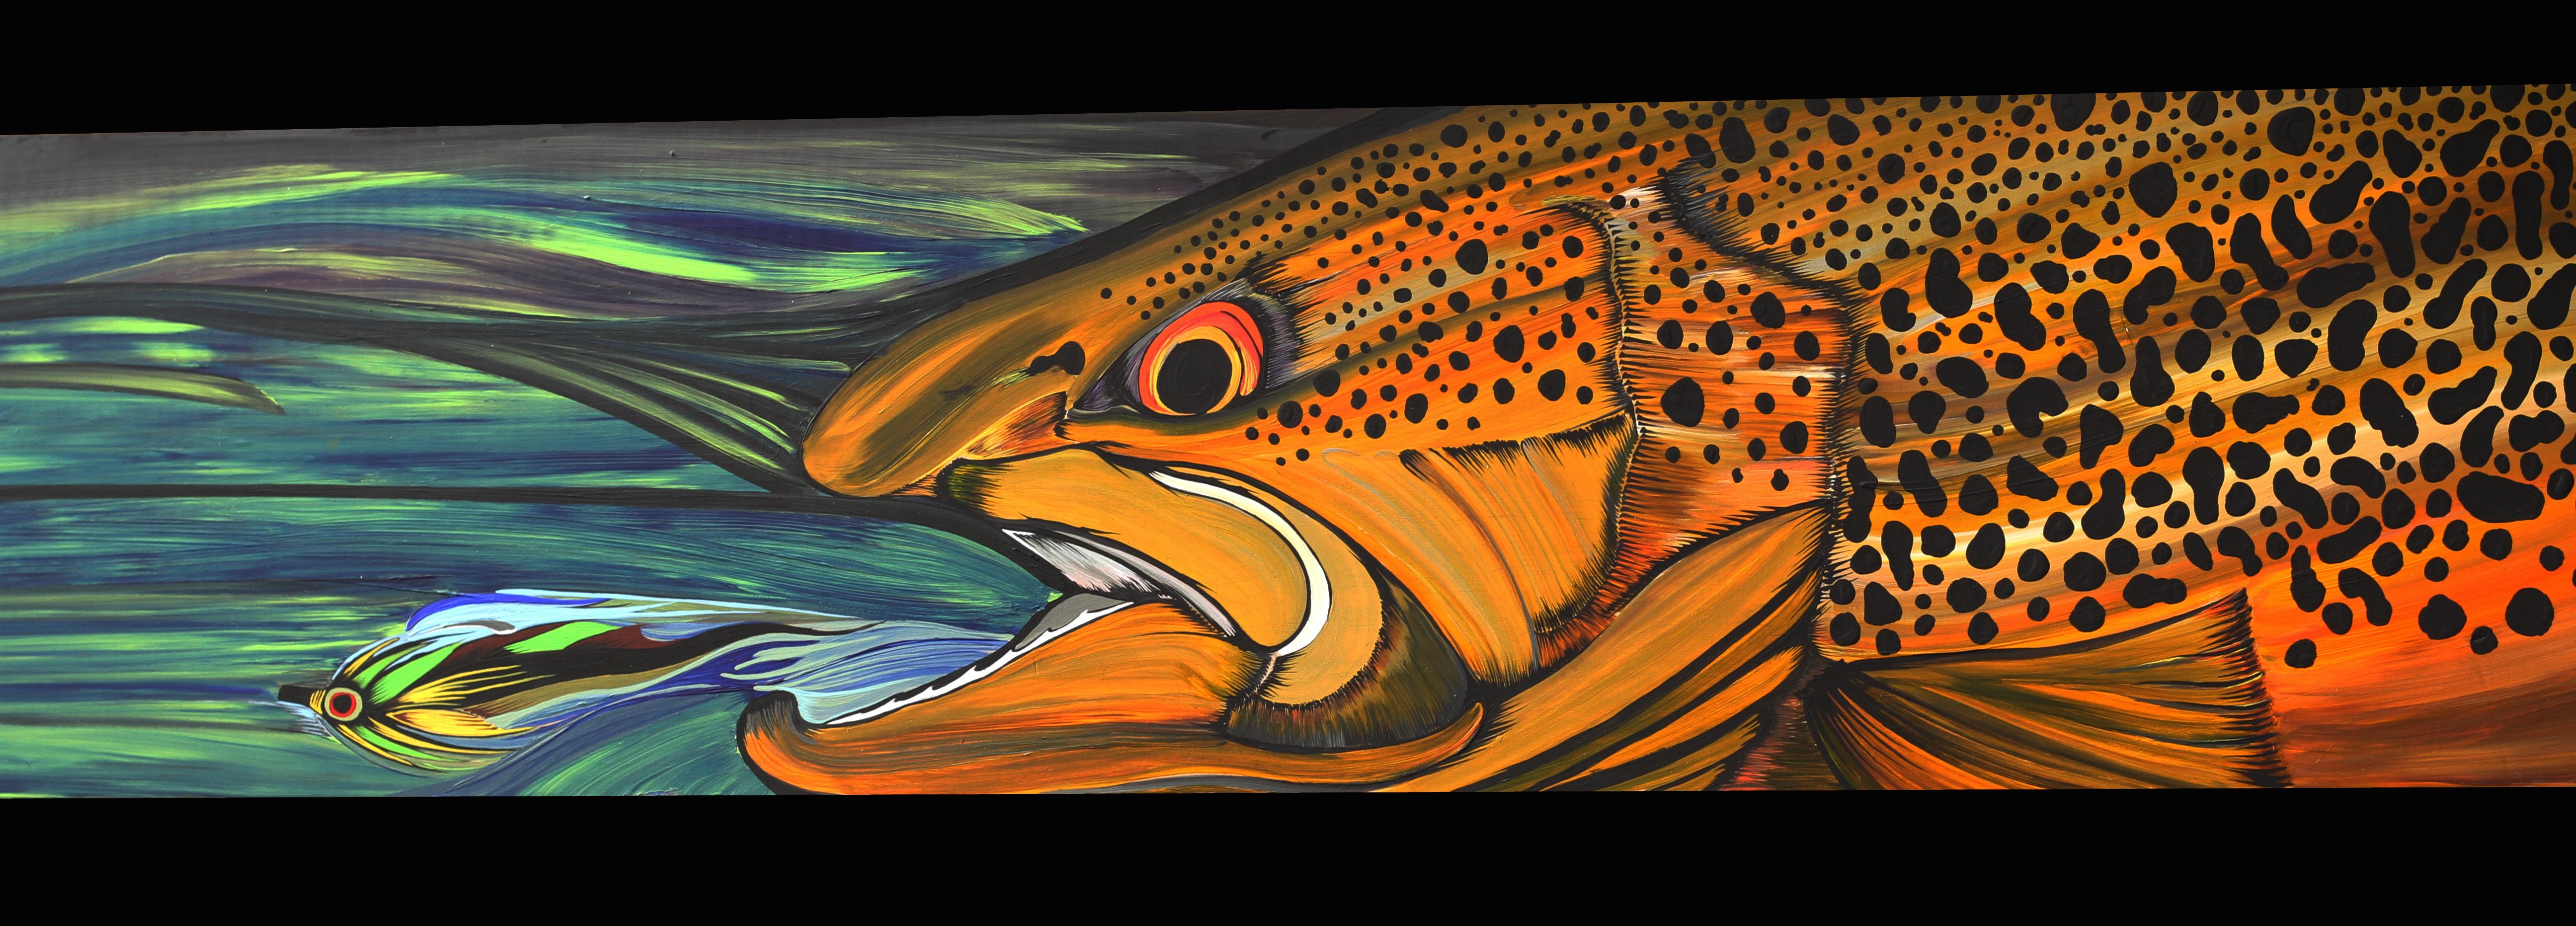 Fish Sport Fishes Bass Trout Artwork Painting Wallpaper Background